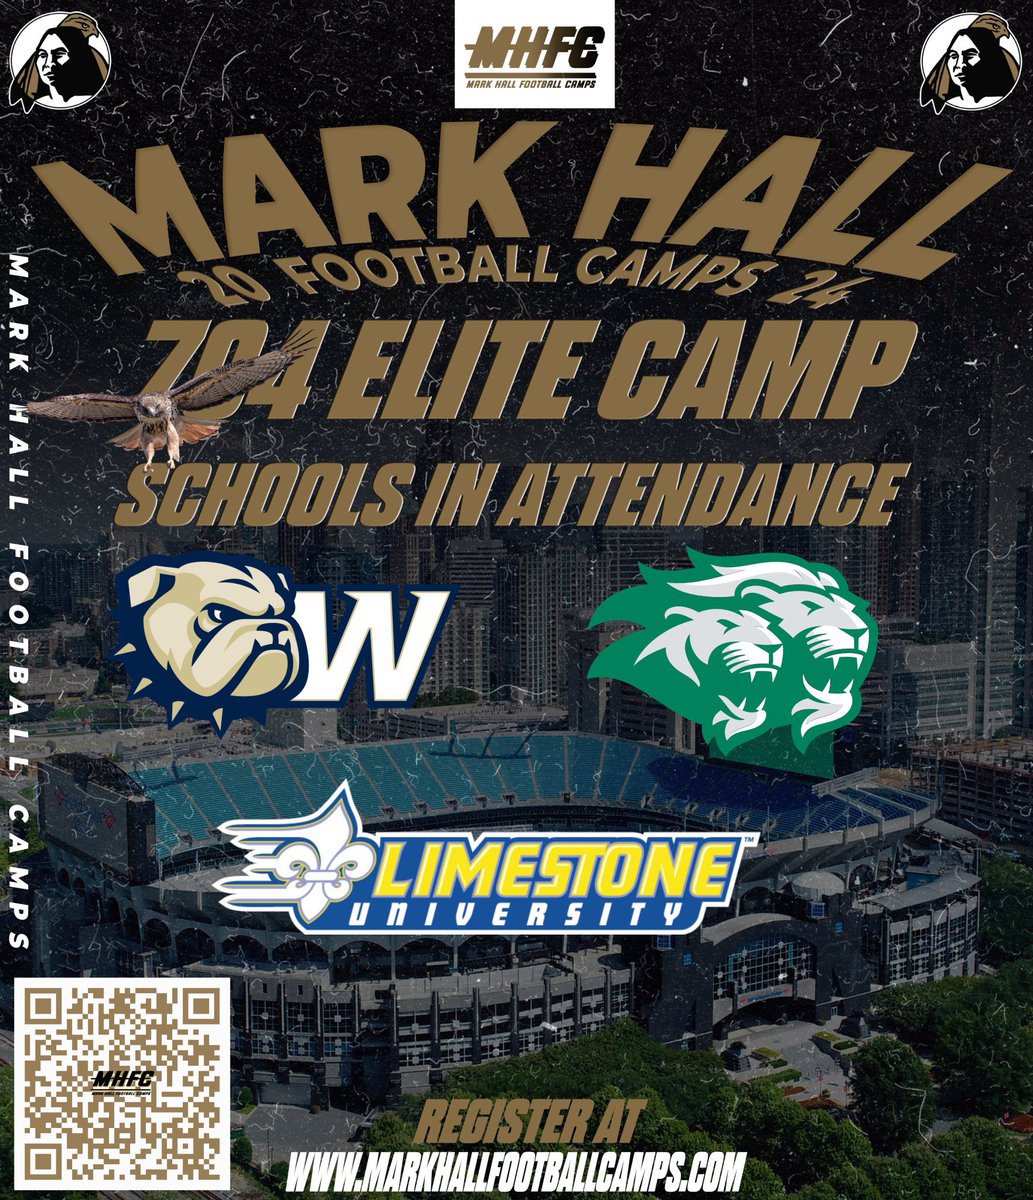 Tonight We Are Up and Rolling !! Excited To See These North Carolina Campers Do Work! Register at: 👇🏾 MarkHallFootballCamps.com